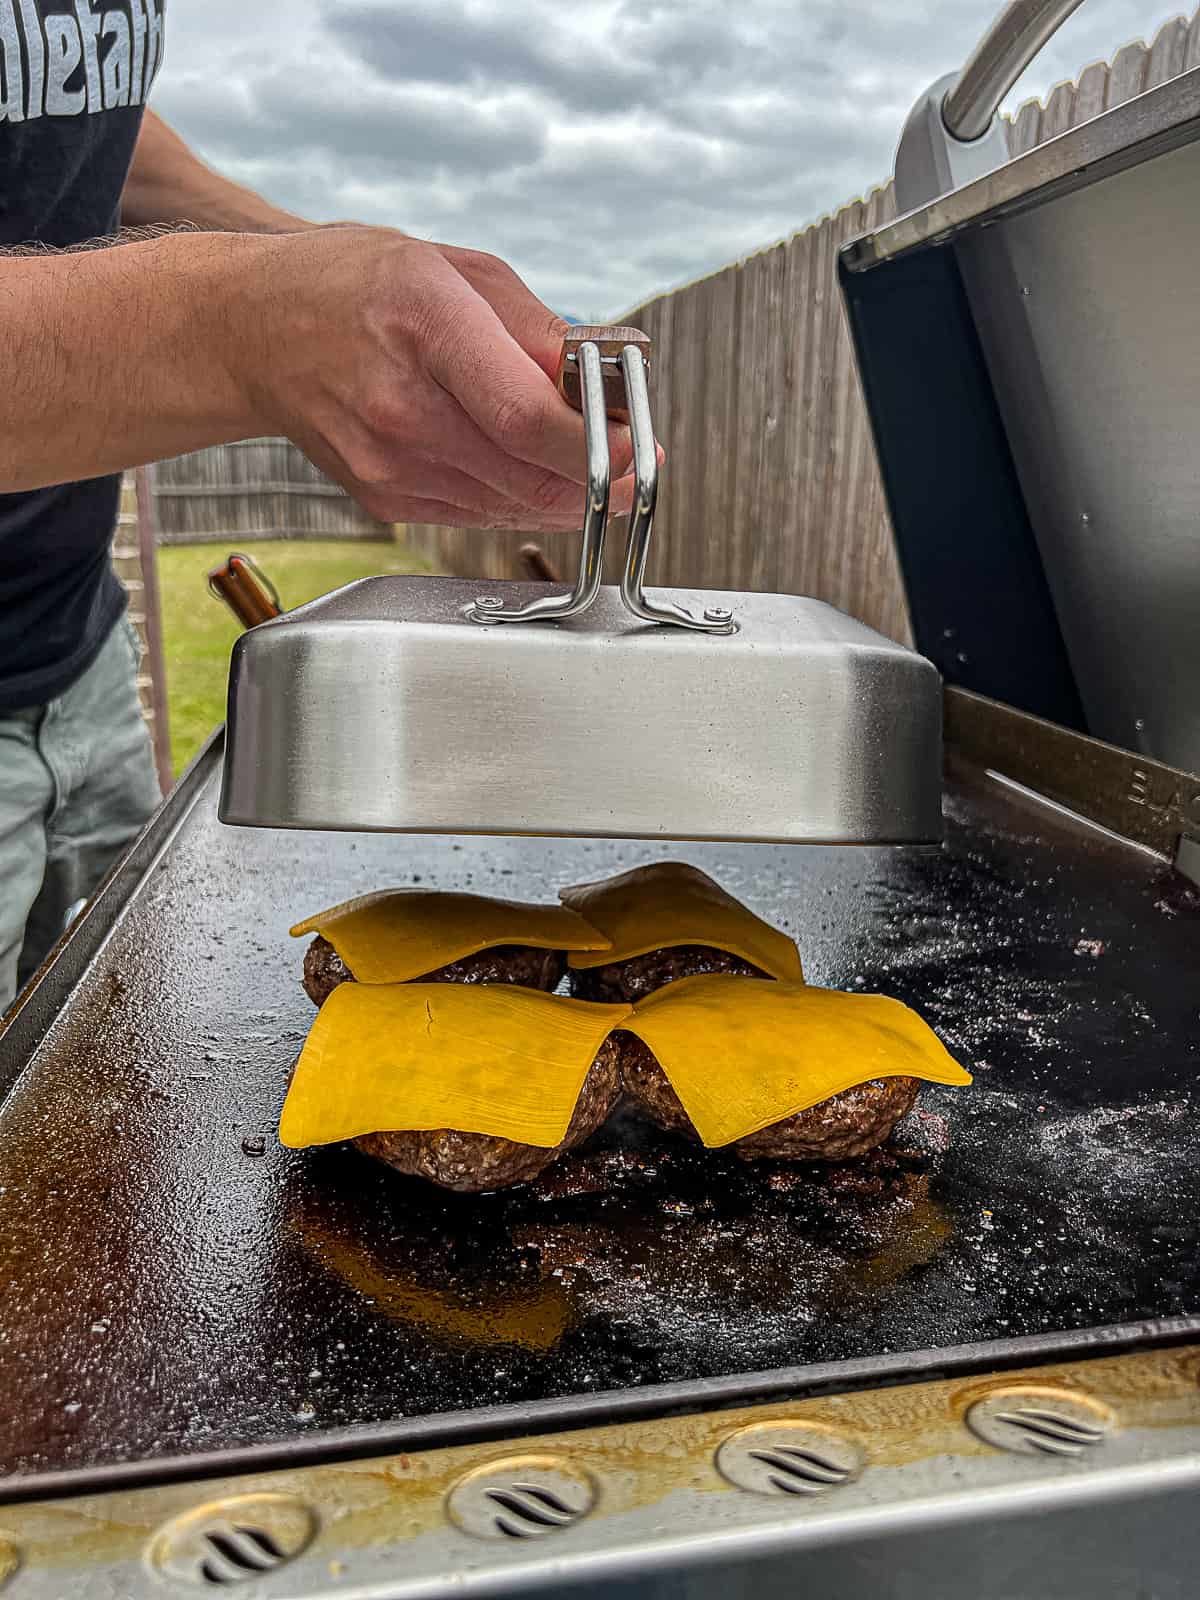 Cooking Blackstone Burgers with Cheese melted in a griddle dome Recipe